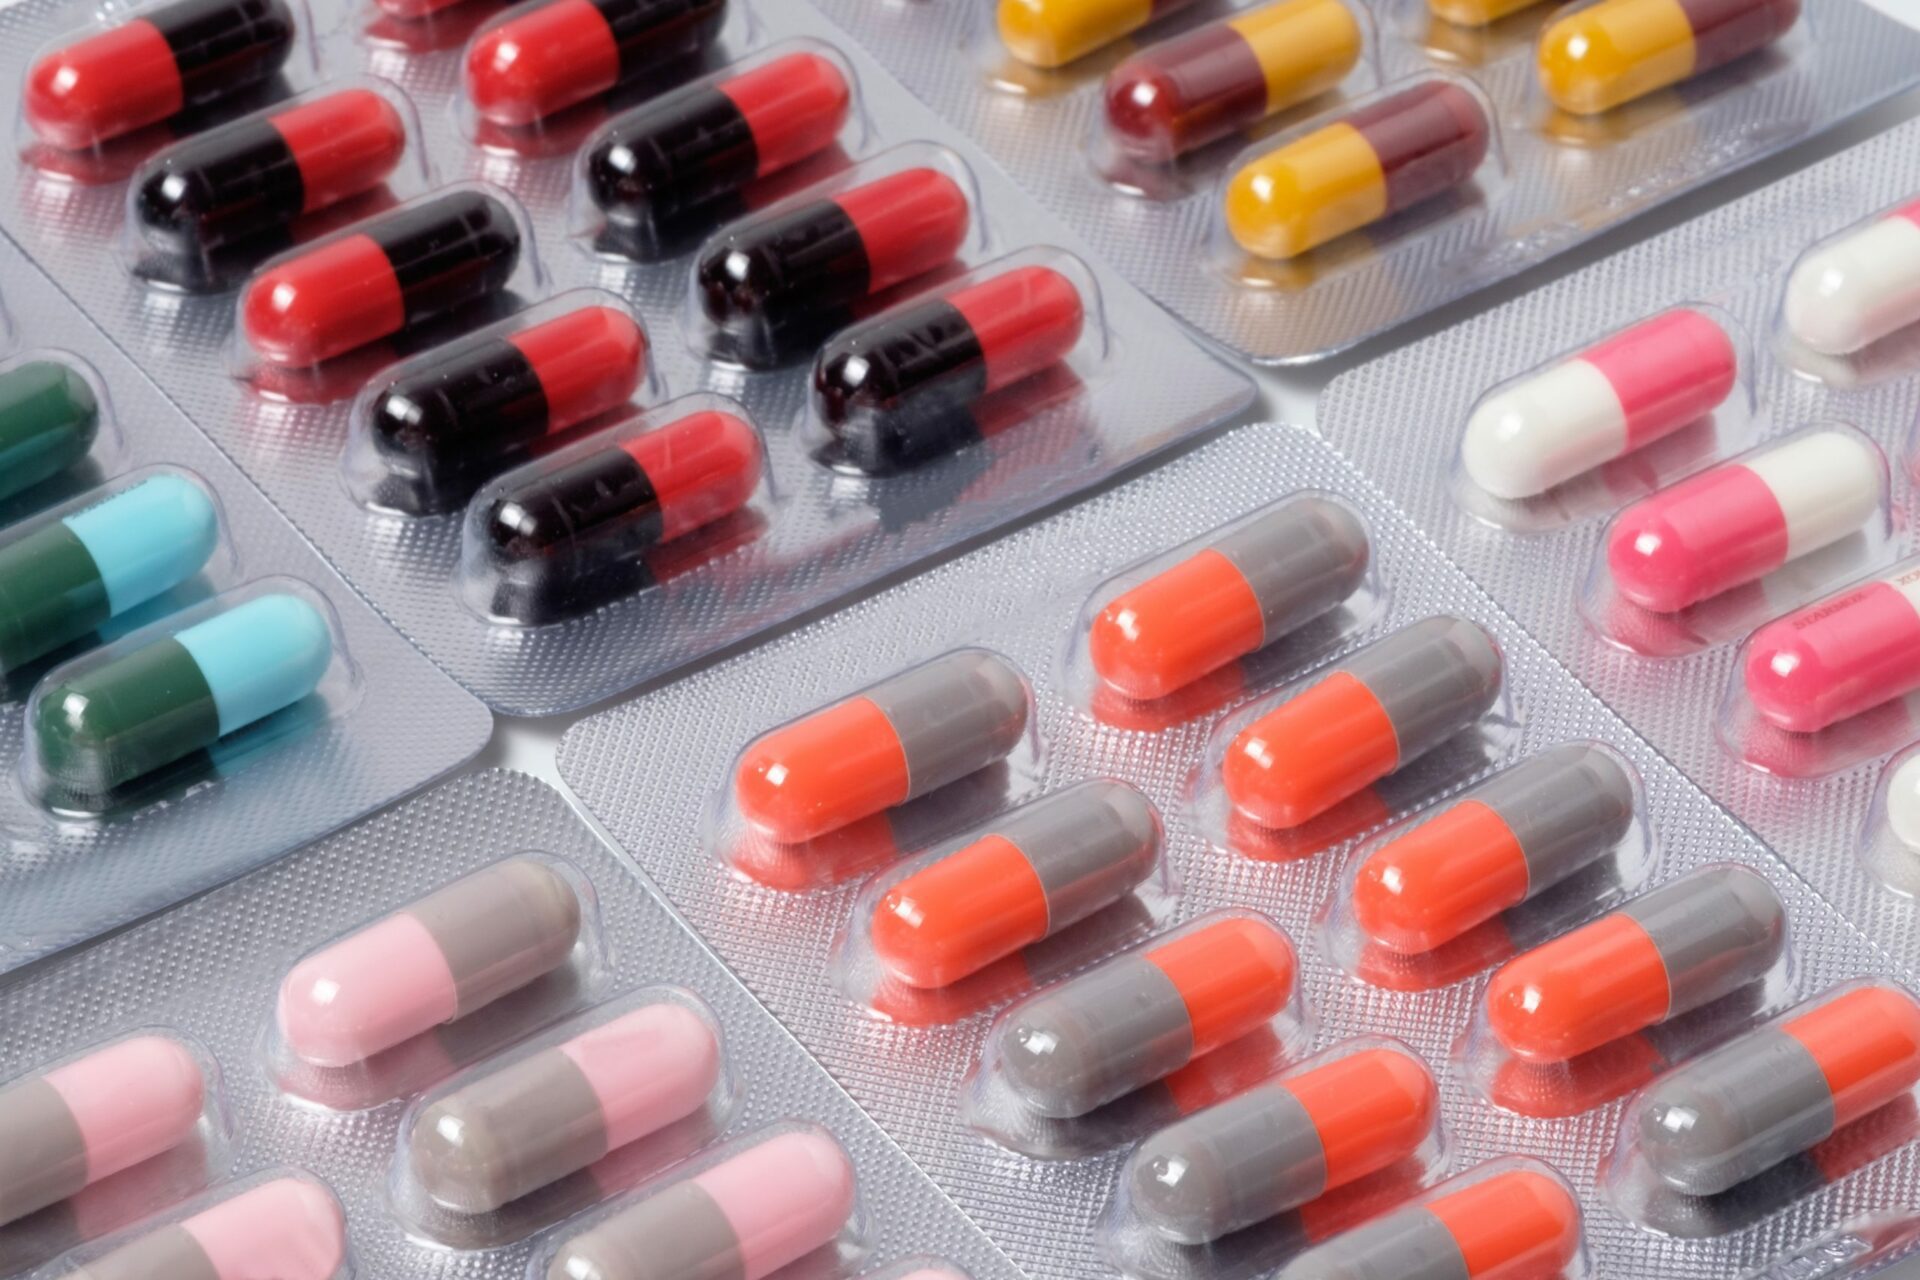 Not taking the full course of antibiotics prescribed by your doctor may lead to an increase of antibiotic resistance.